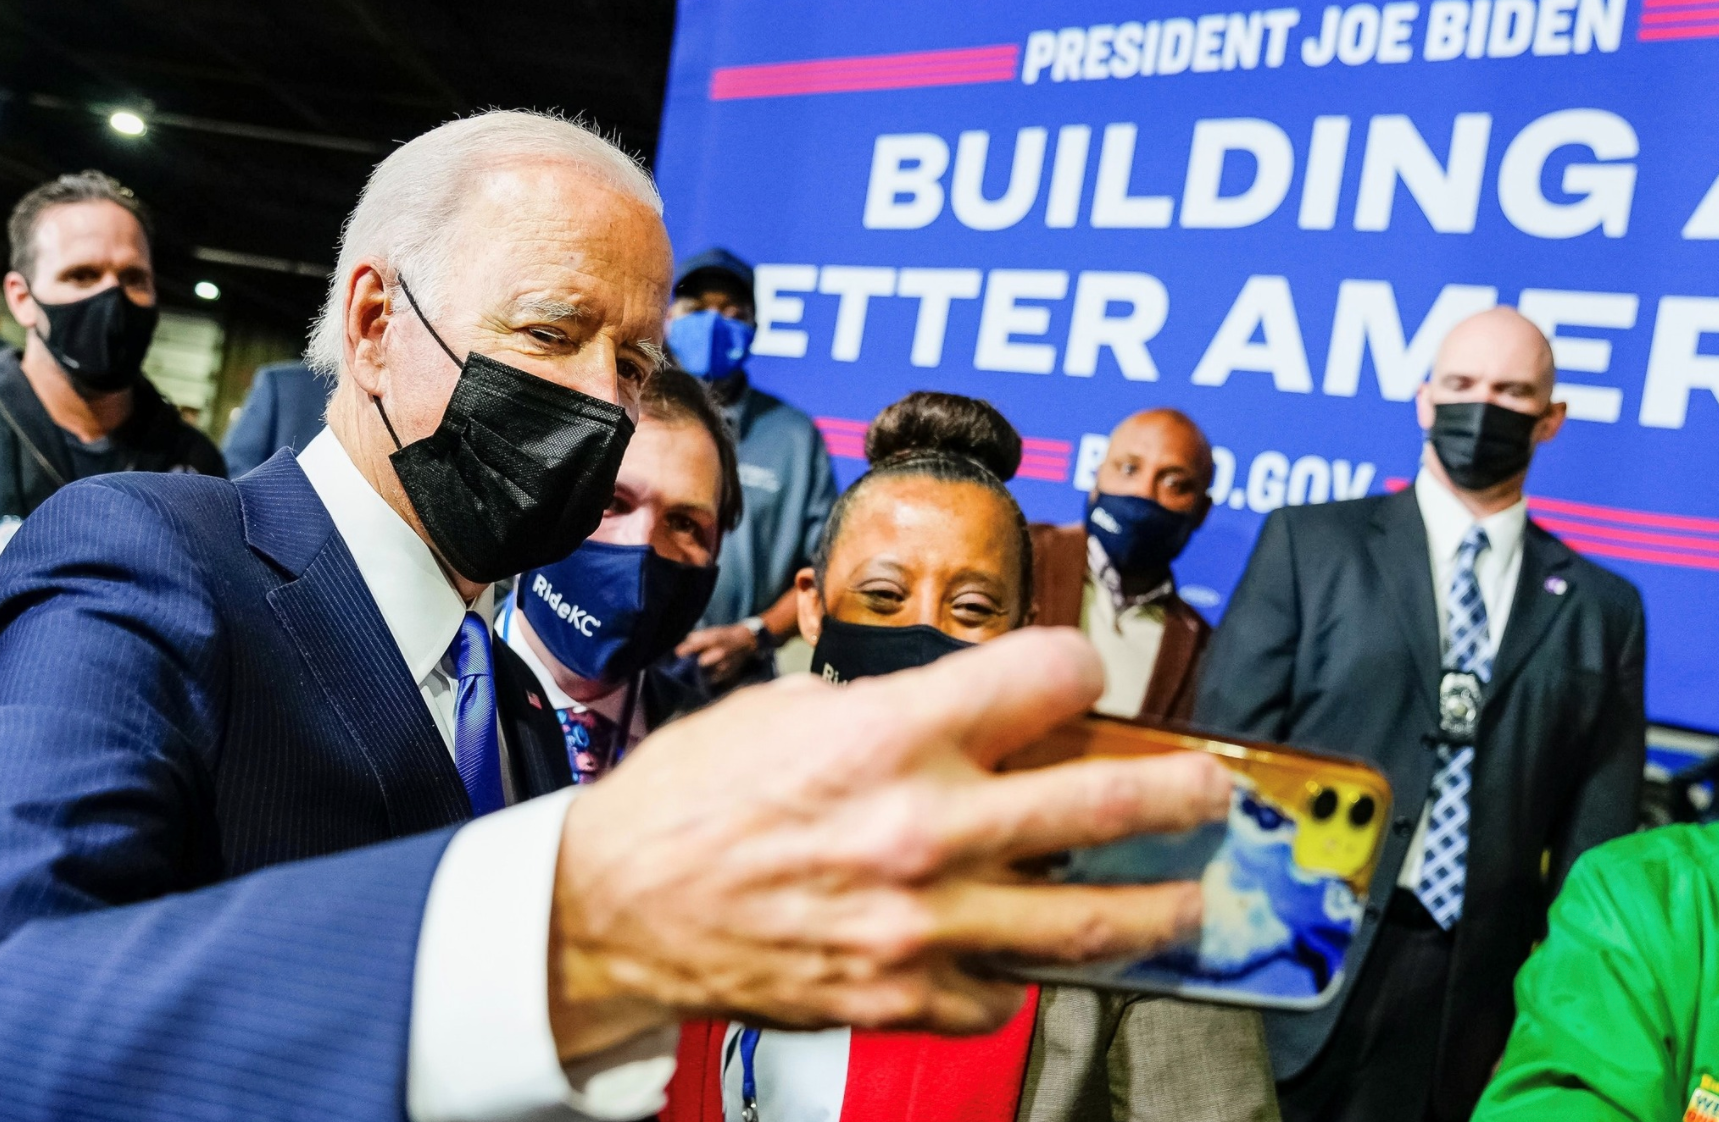 Biden taking a selfie with an immigrant